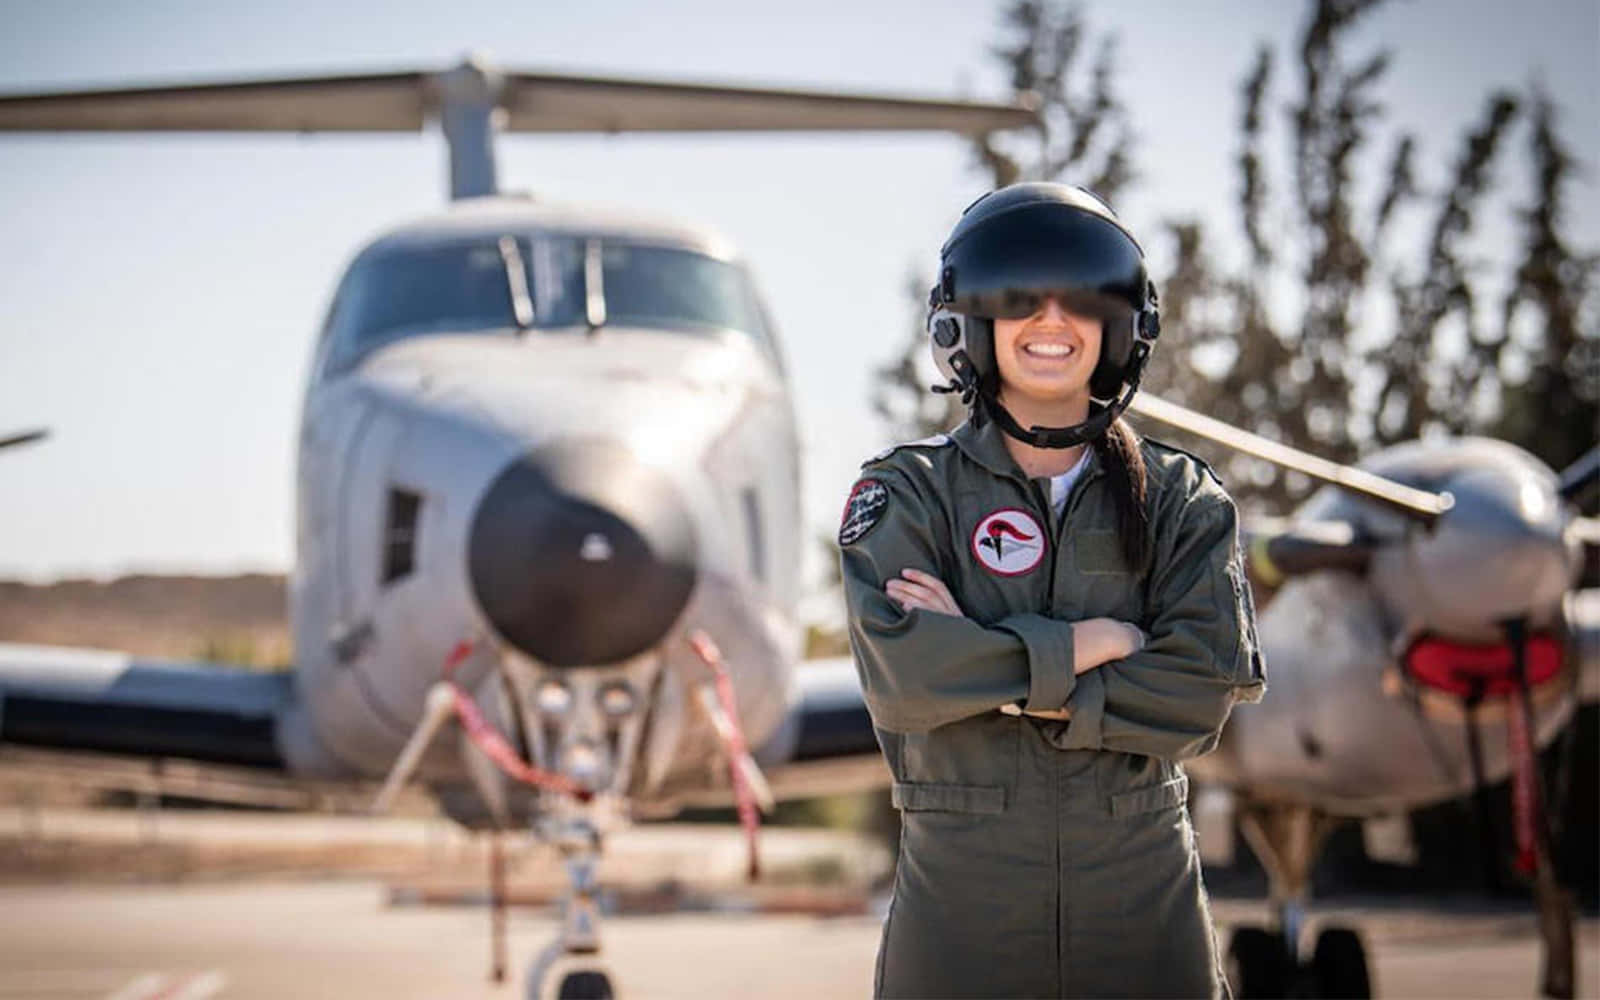 Smiling Woman Pilot Next To Airplane Picture